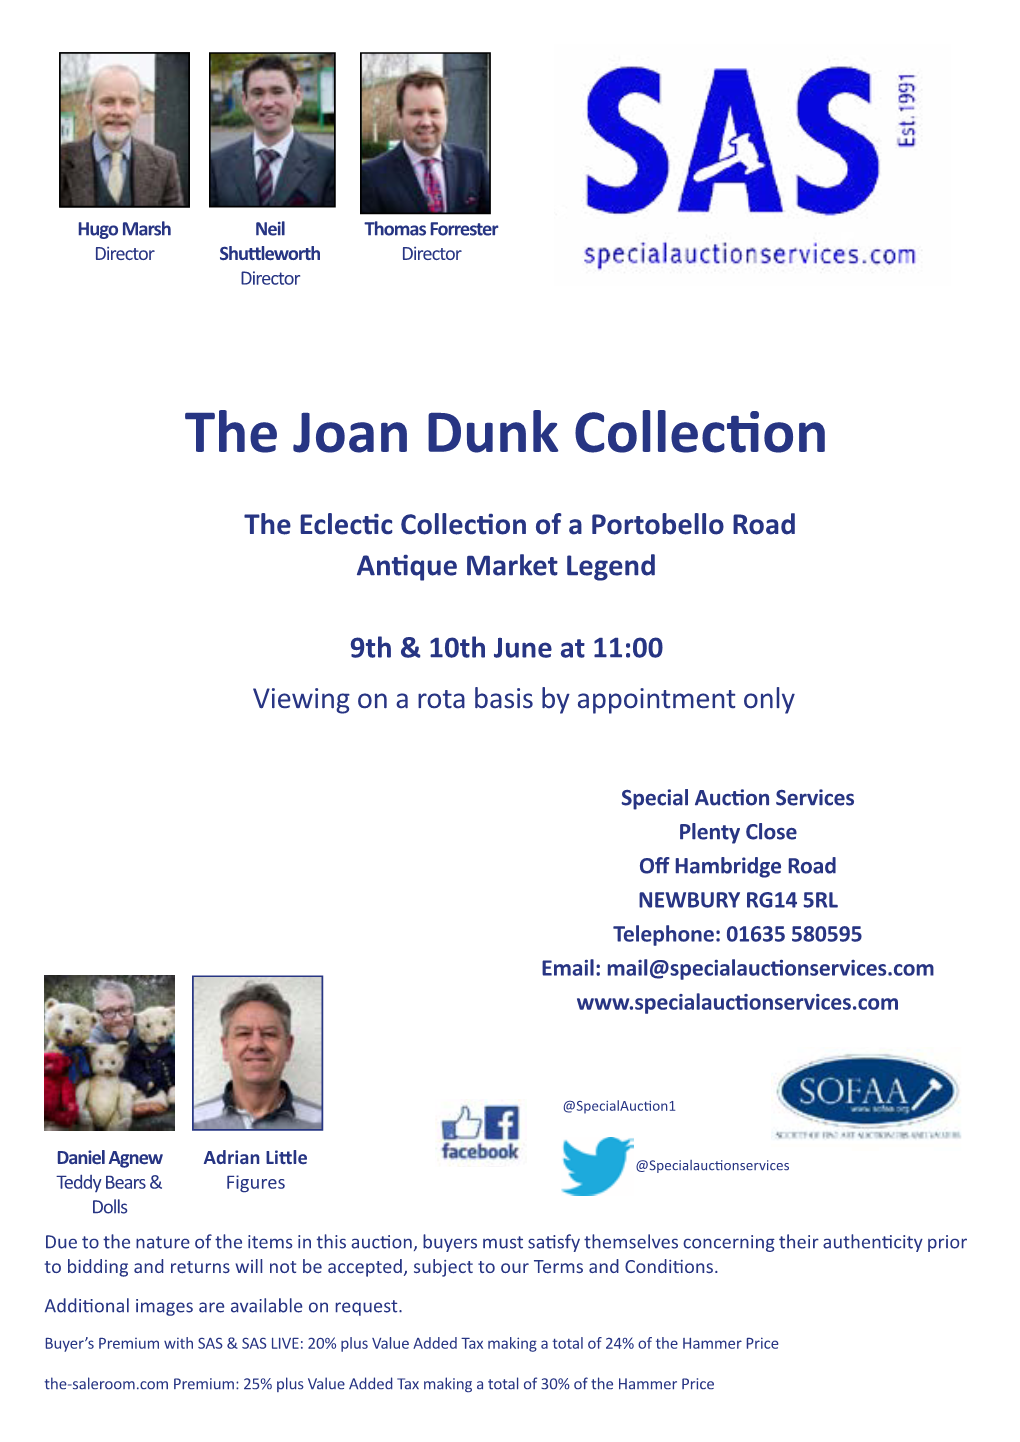 The Joan Dunk Collection